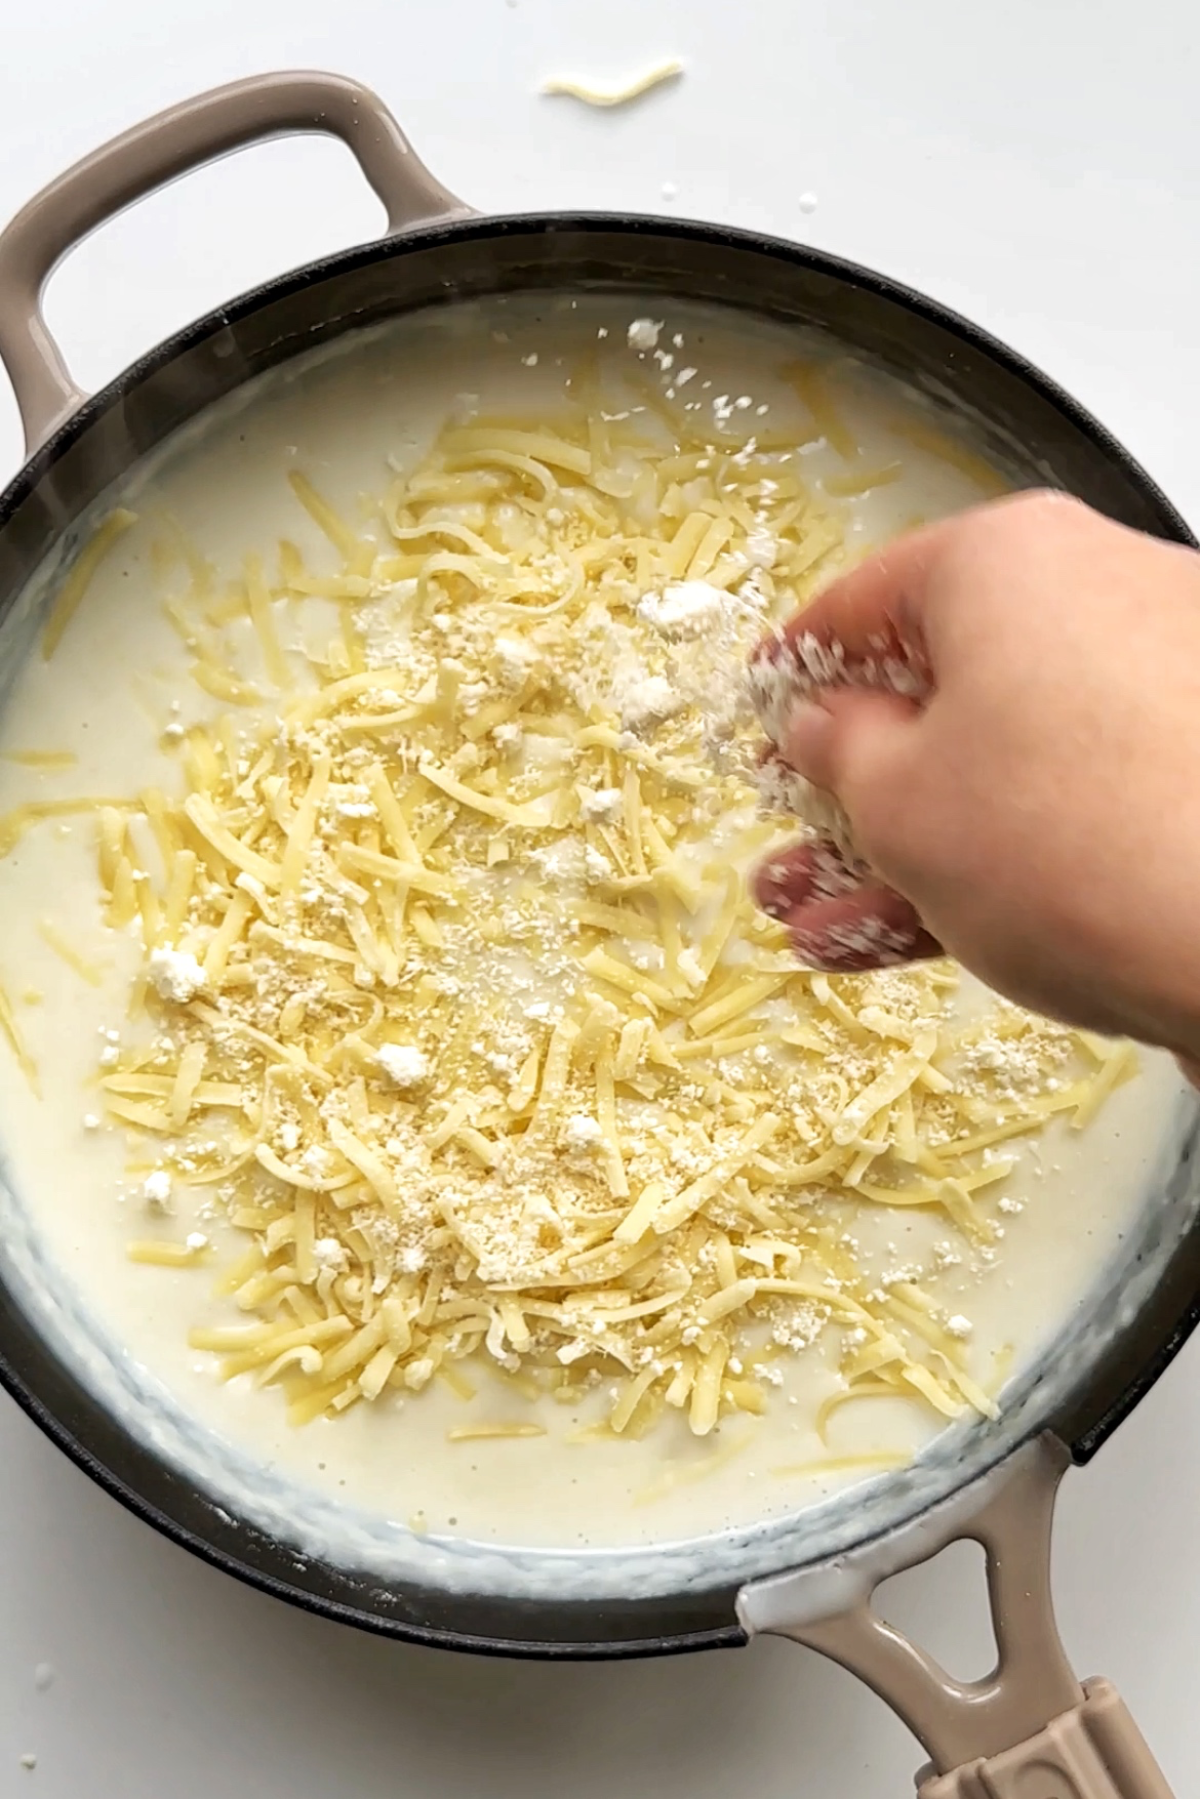 Sprinkling parmesan cheese over a béchamel sauce in black pan.